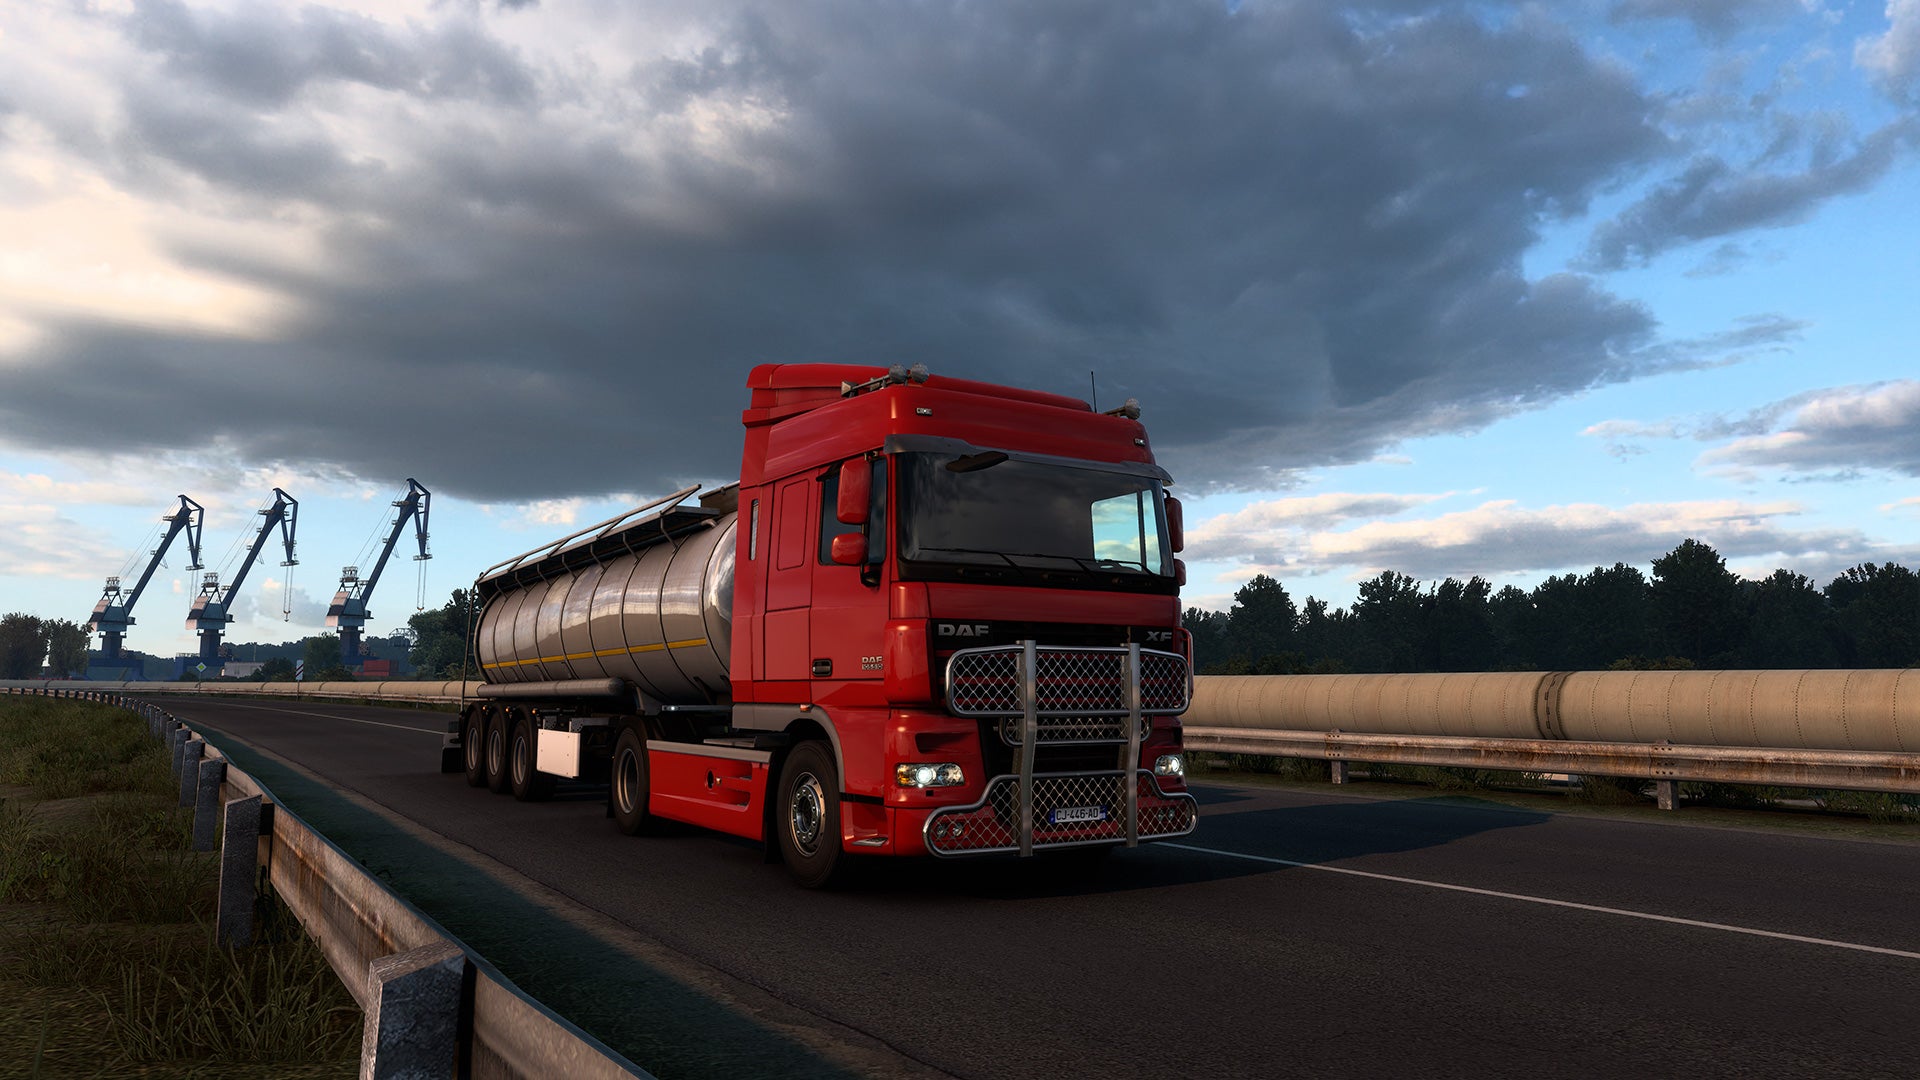 A Euro Truck Simulator 2 screenshot showing a truck under the new lighting system.